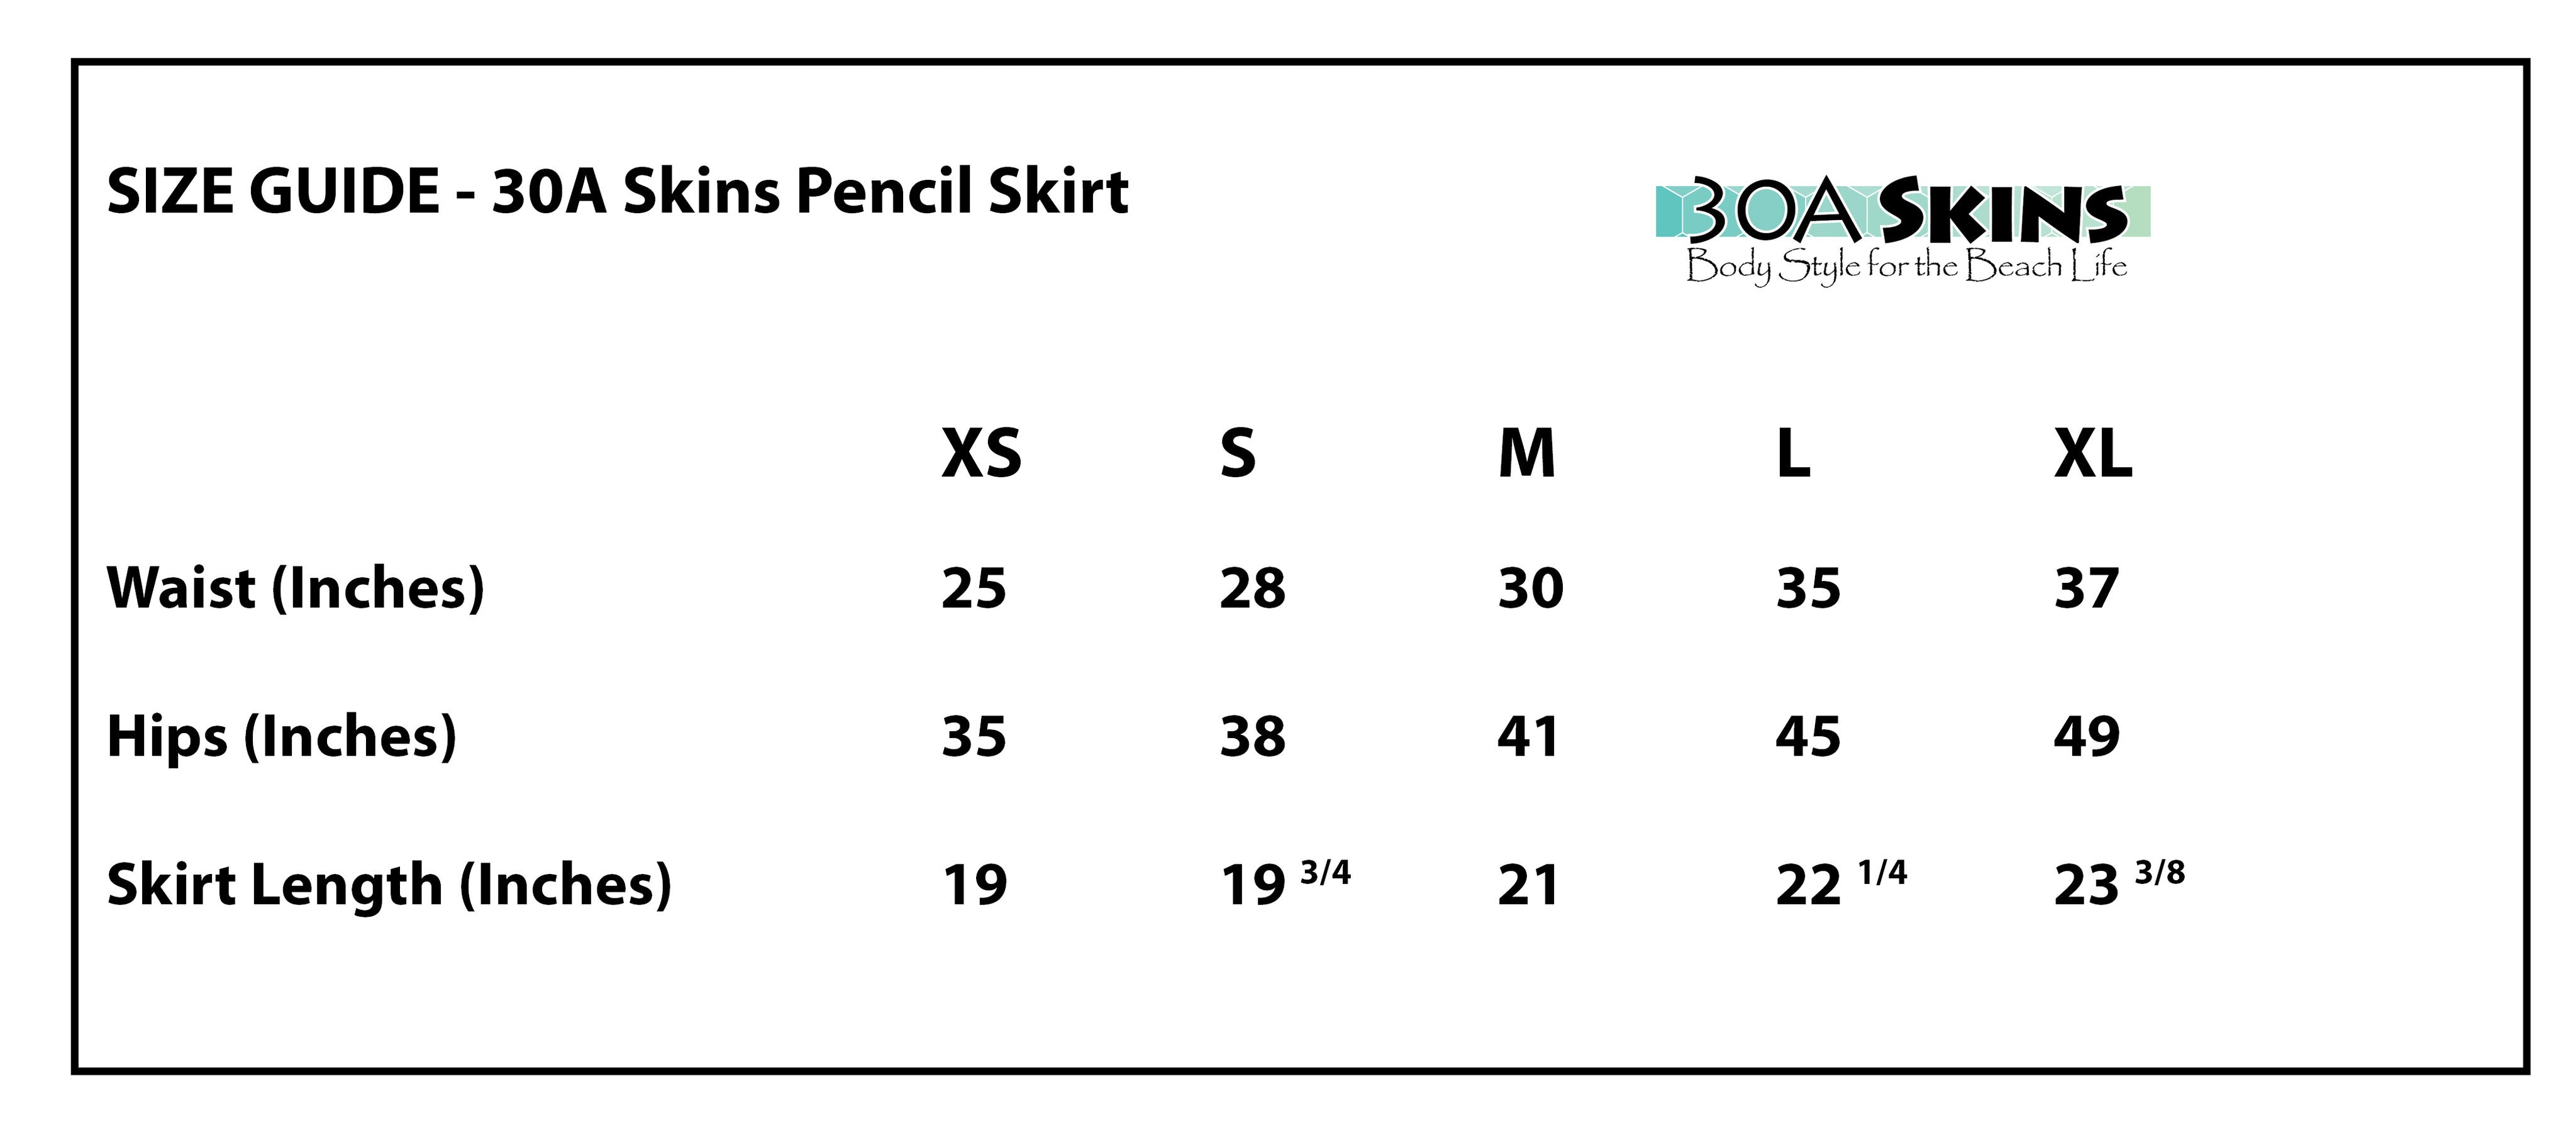 30a skins sizing chart pencil skirt